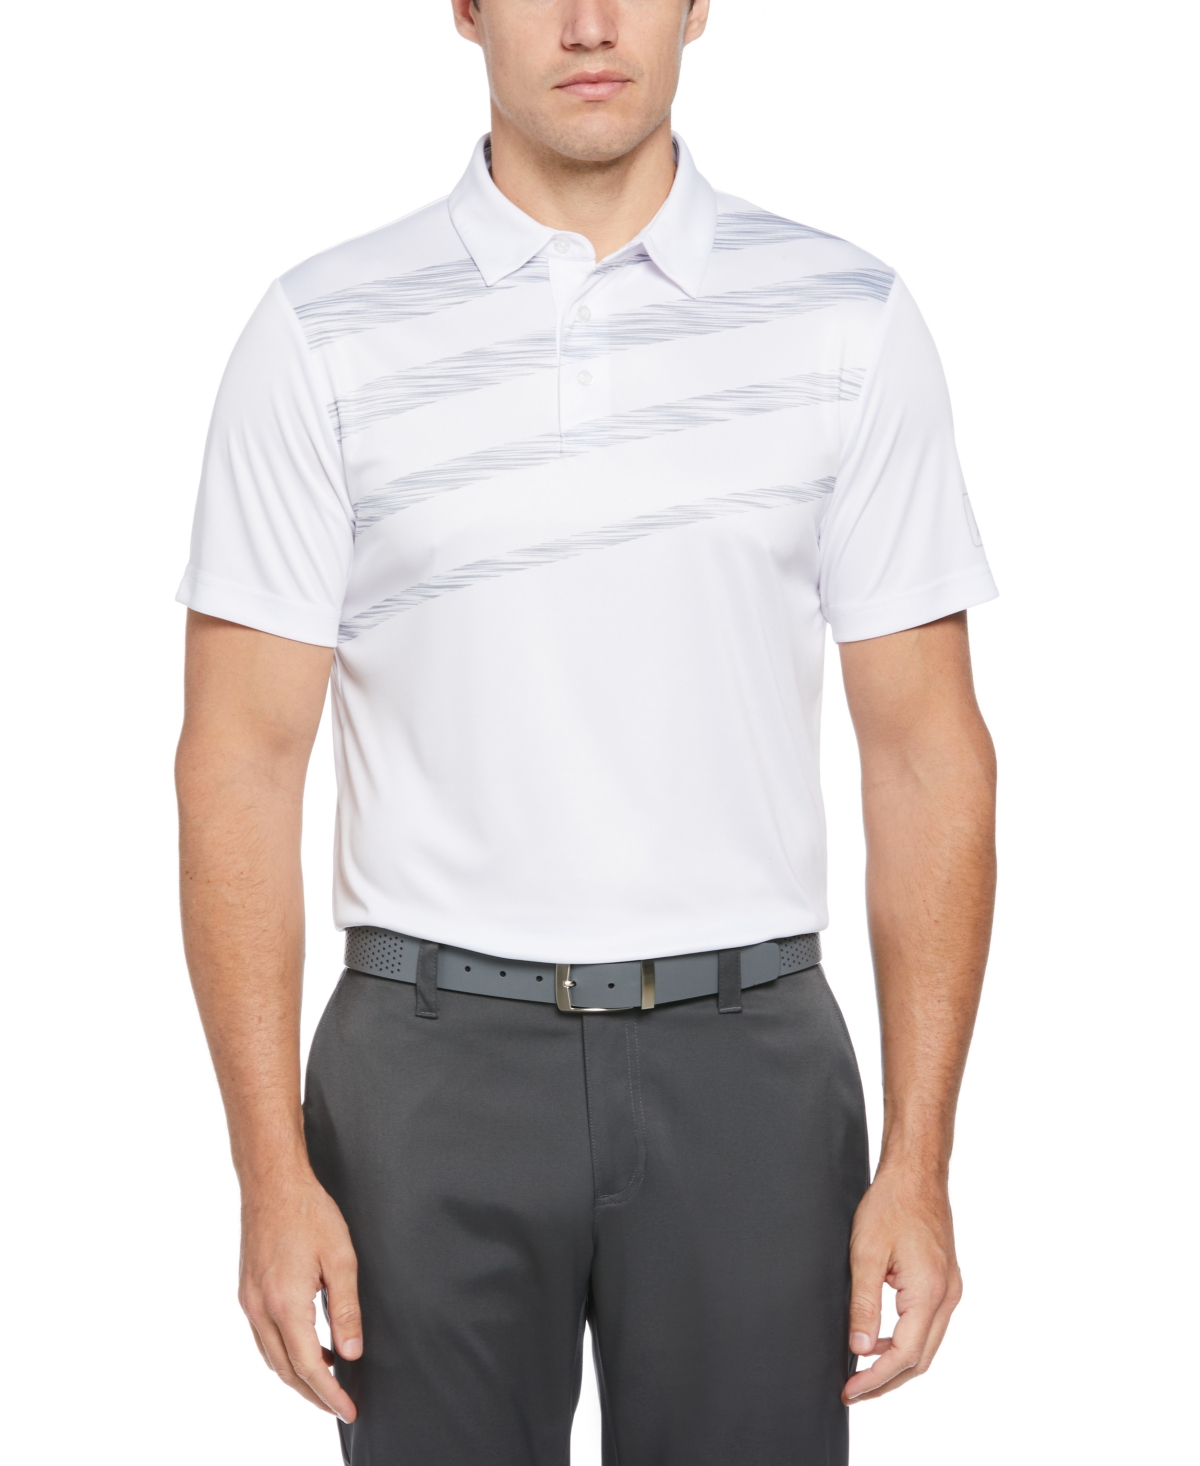 Men's Athletic-Fit Asymmetrical Space-Dyed Stripe Performance Golf Polo Shirt - Dazzling Blue